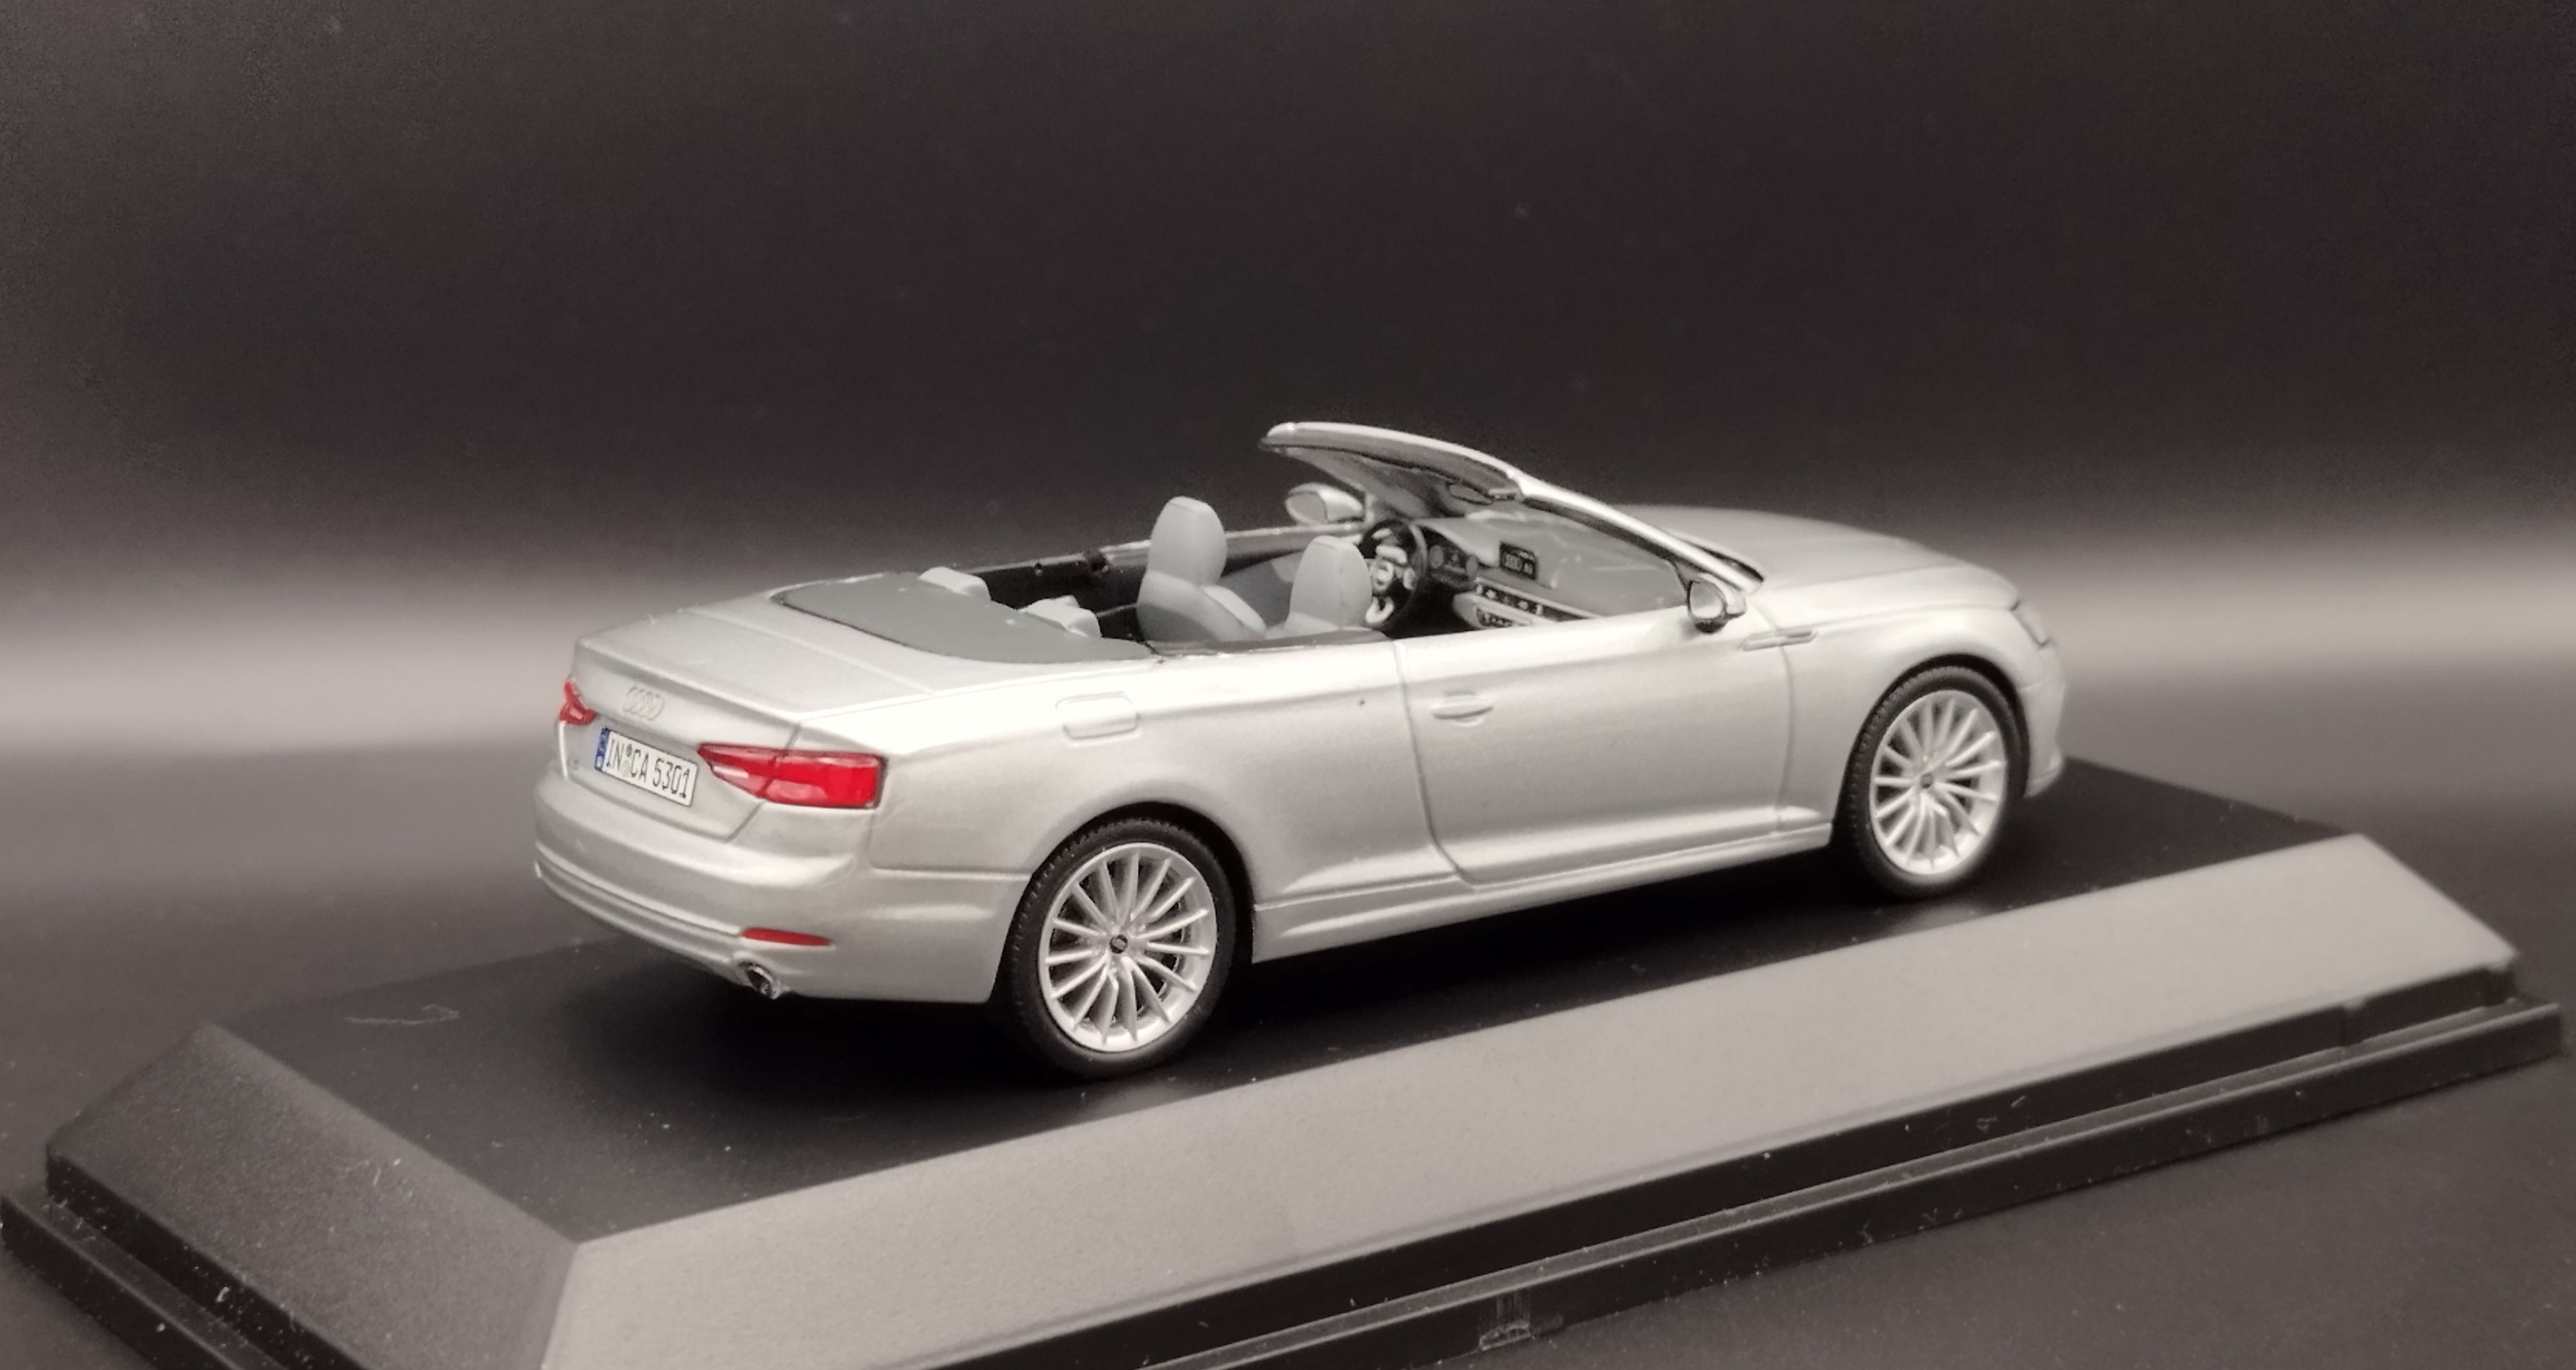 1:43 Spark Audi A5 cabriolet model nowy